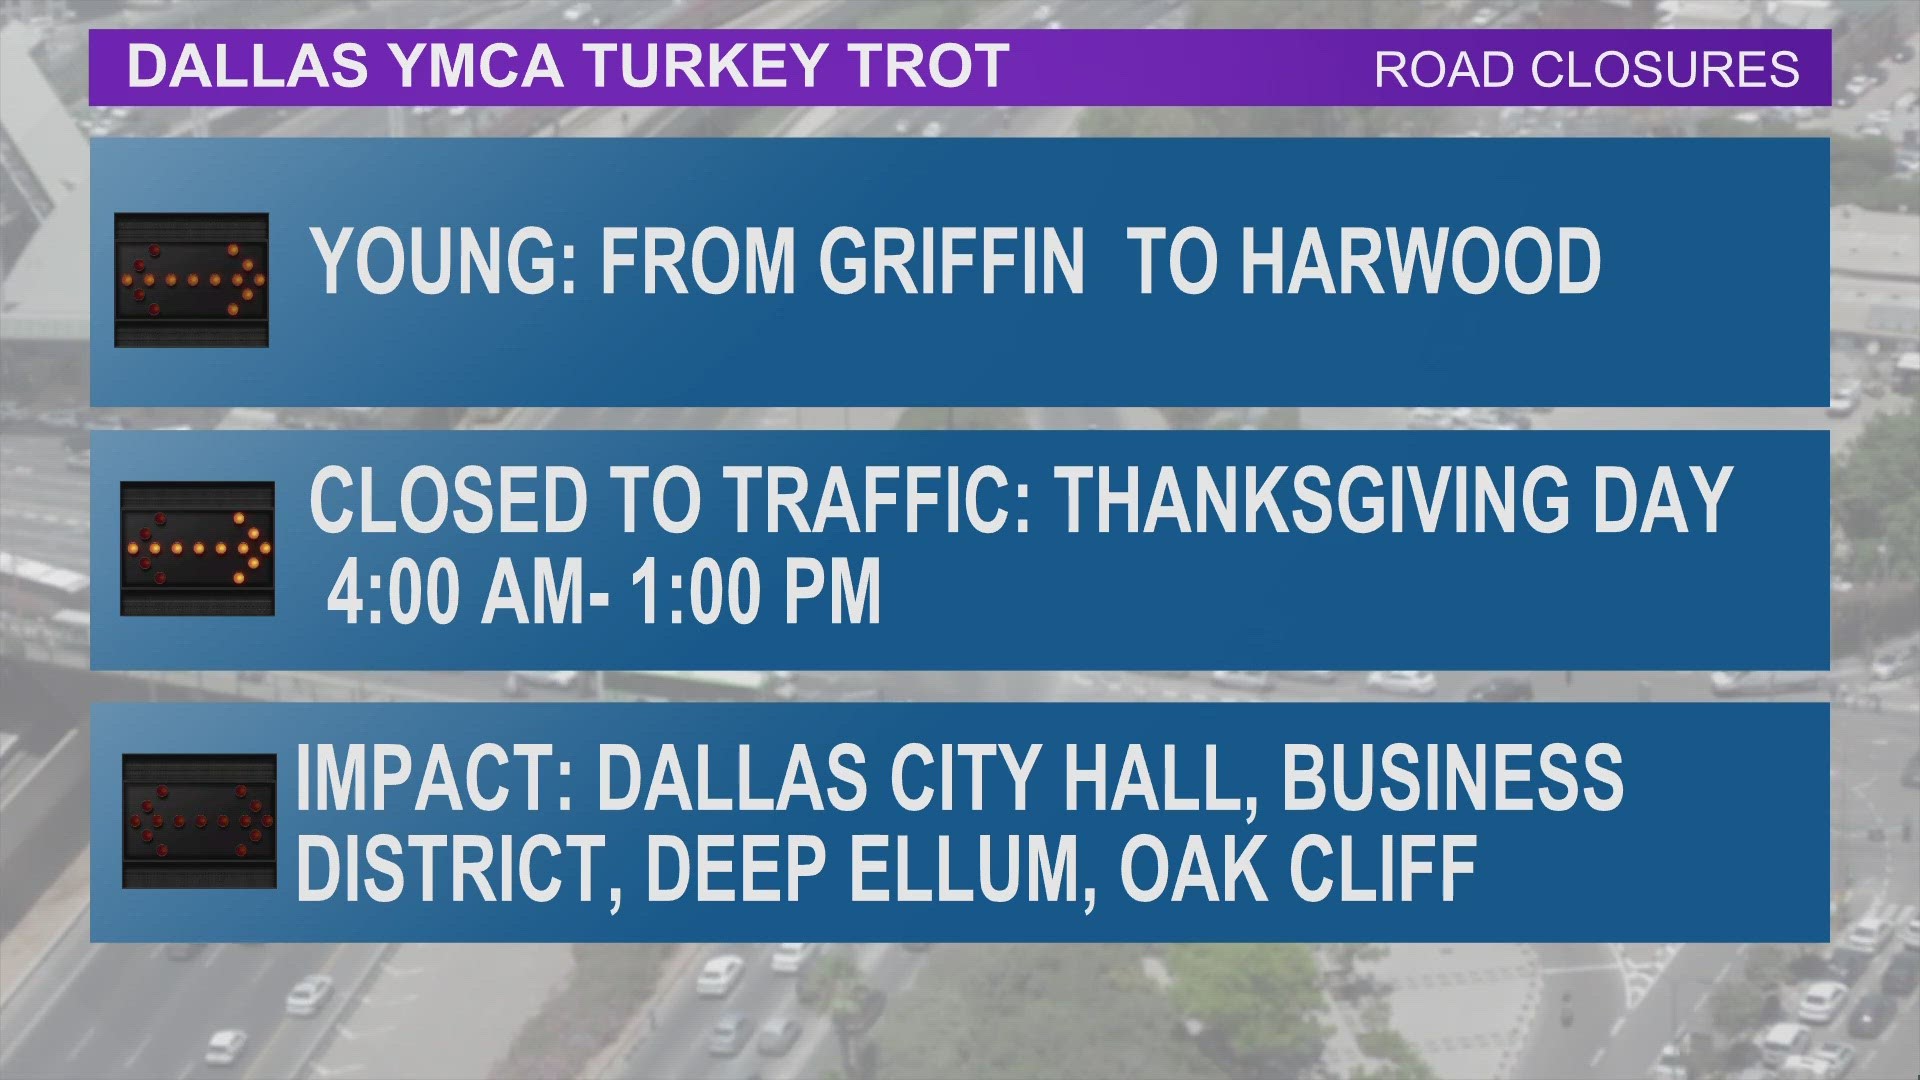 The President & CEO of the YMCA of Metropolitan Dallas joined Daybreak ahead of the Turkey Trot. Stacia Wilson also listed the traffic closures you need to know.